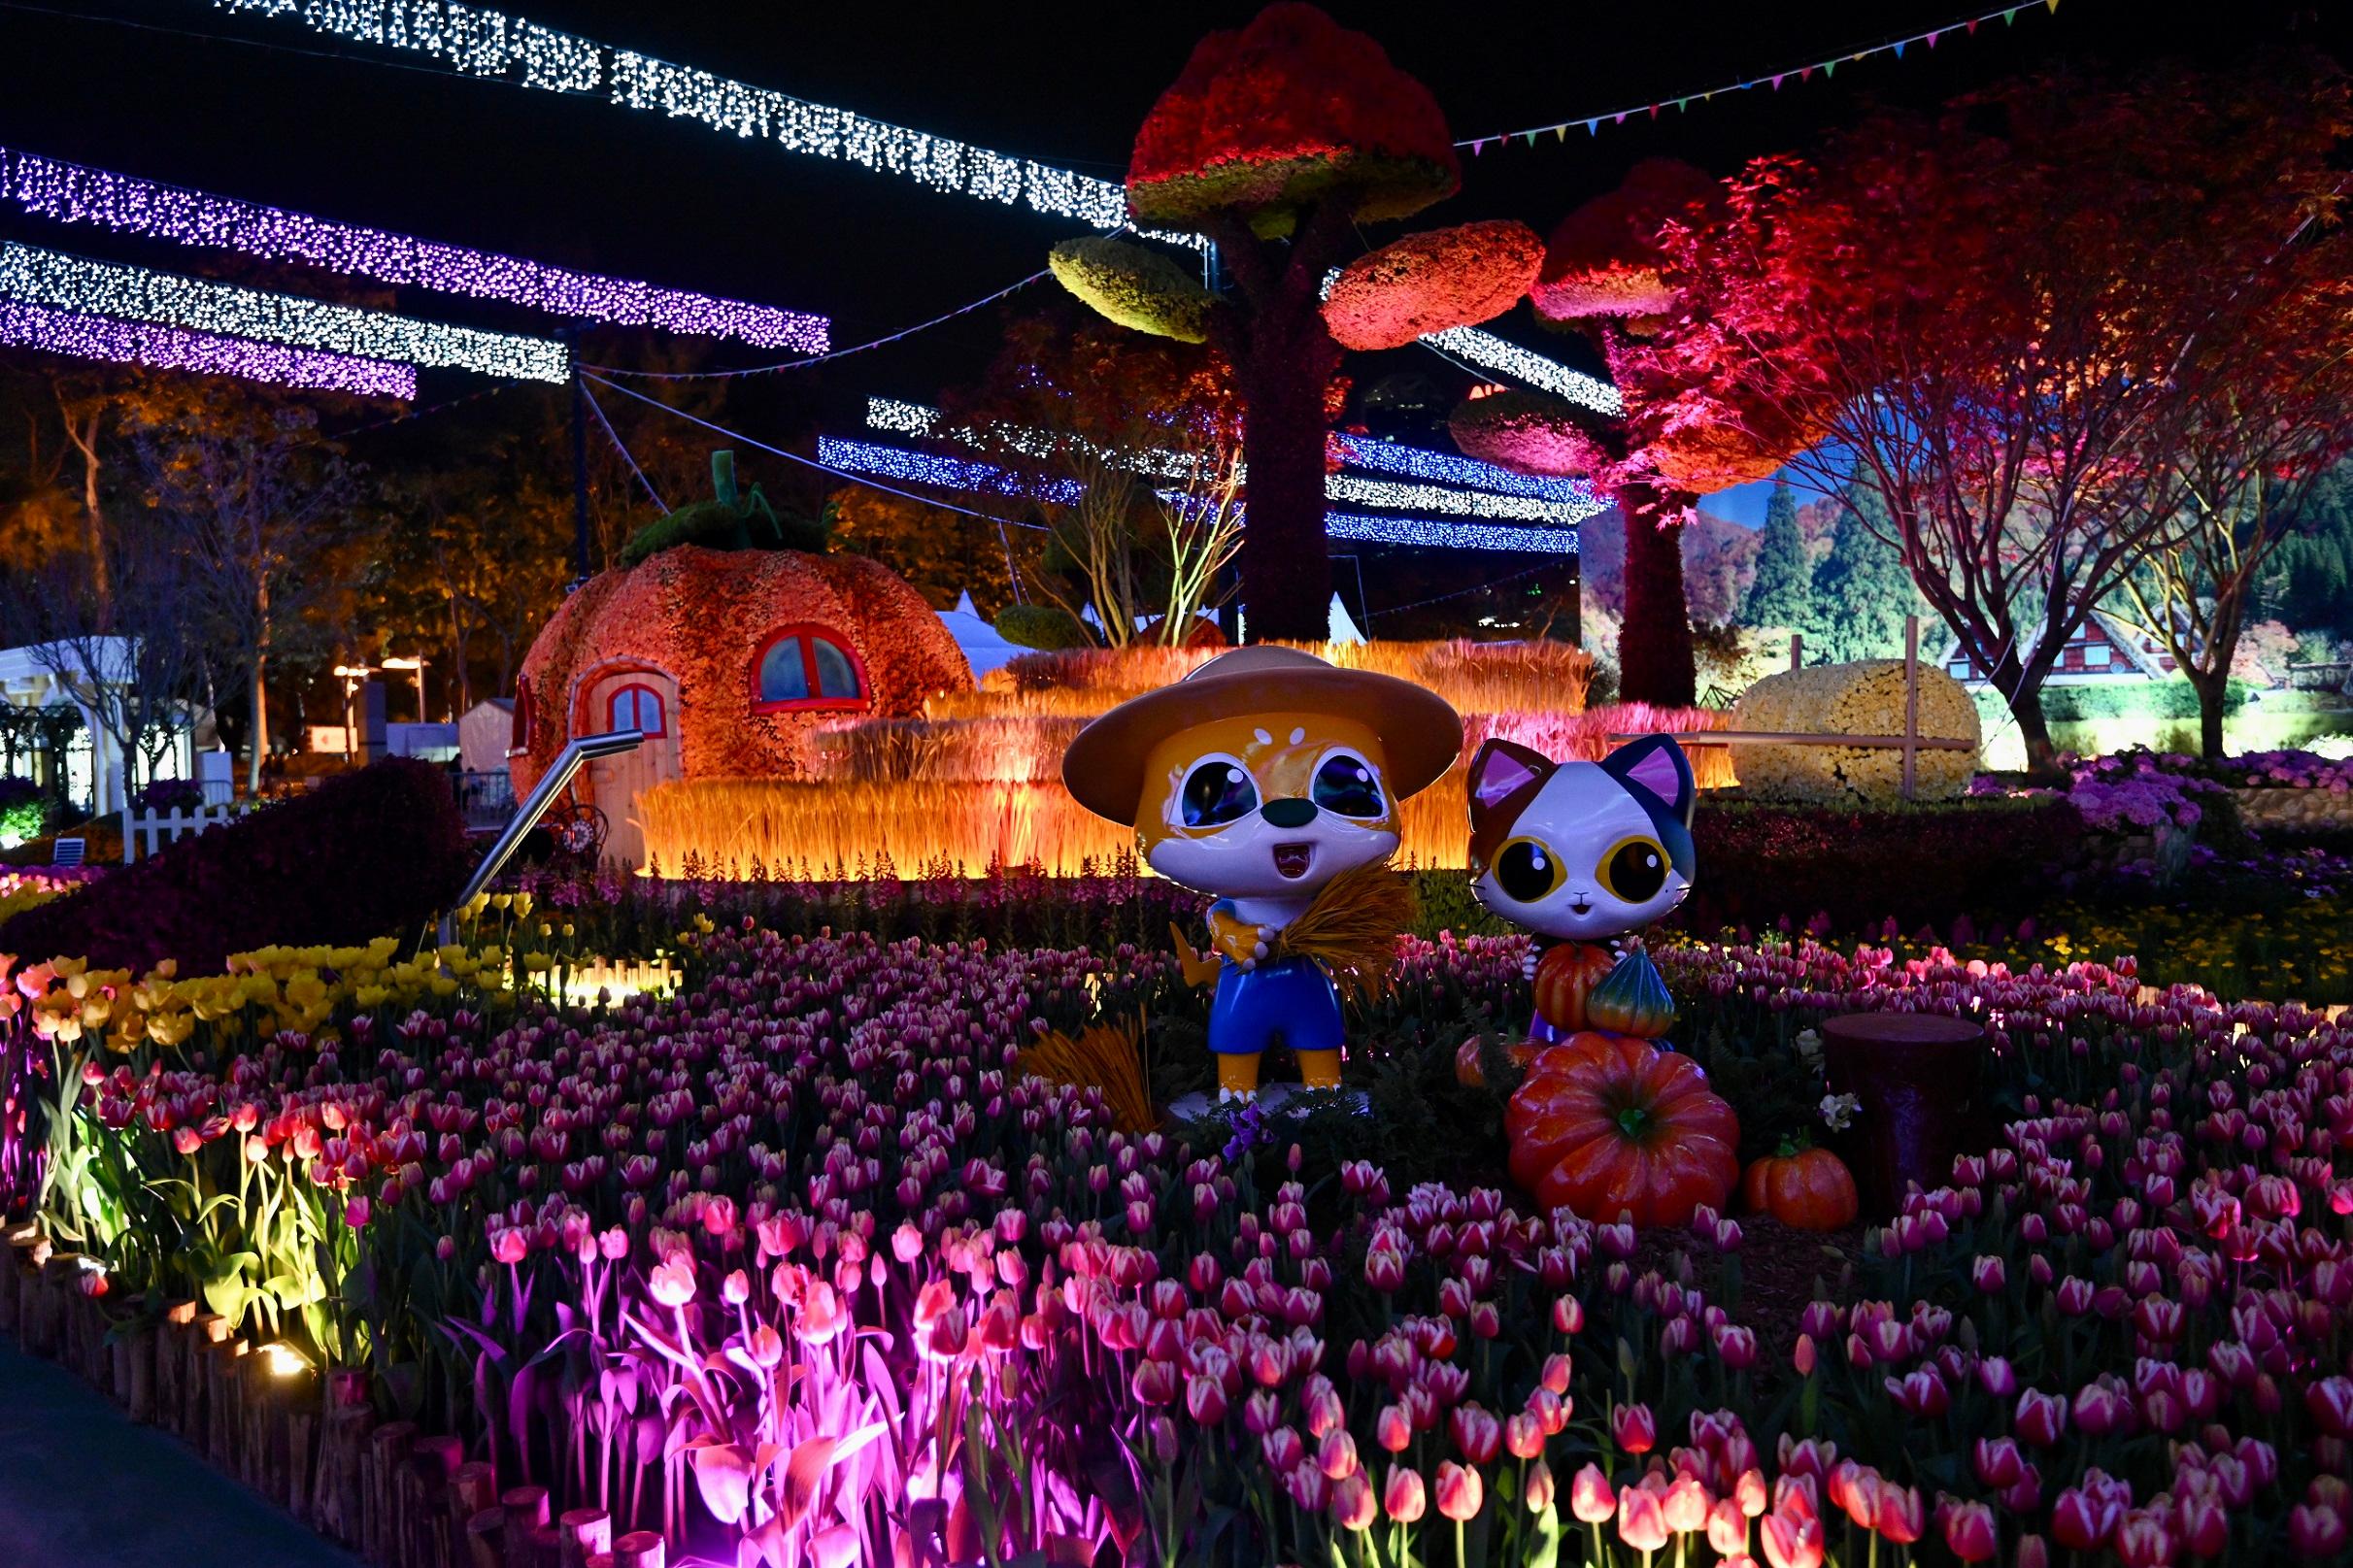 The Hong Kong Flower Show 2023 will be held at Victoria Park from tomorrow (March 10) until March 19. This year's flower show features "Bliss in Bloom" as the main theme and hydrangea as the theme flower. Photo shows a music and light show at the flower plots along the central axis of the showground, which will amuse visitors under the stars.